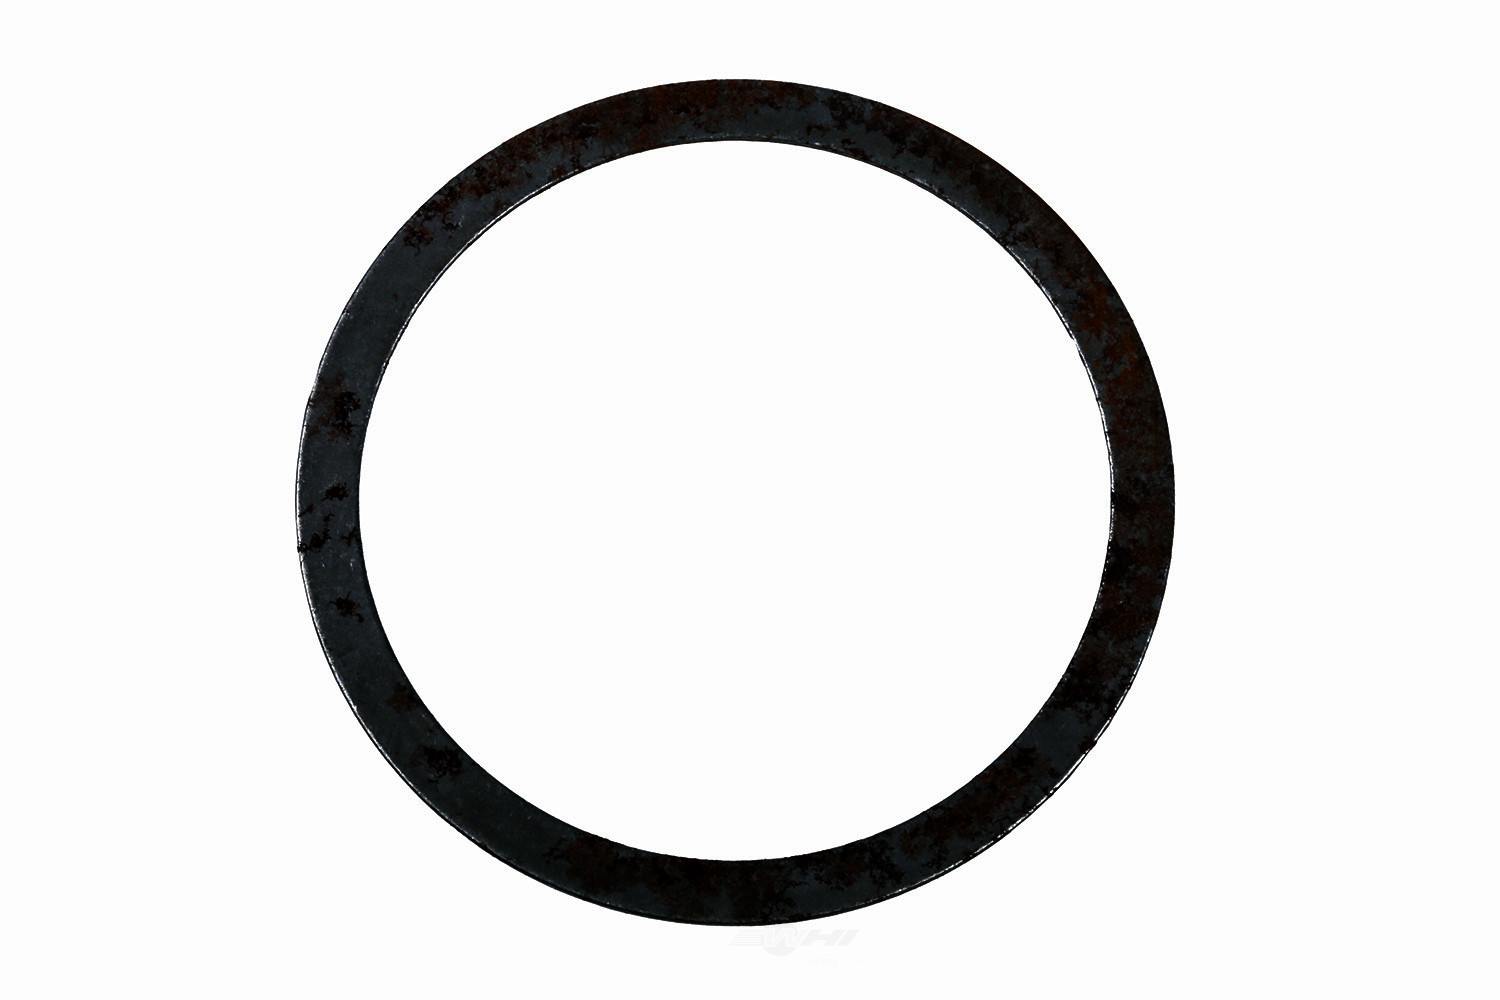 GM GENUINE PARTS - Differential Pinion Bearing Washer - GMP 24234090